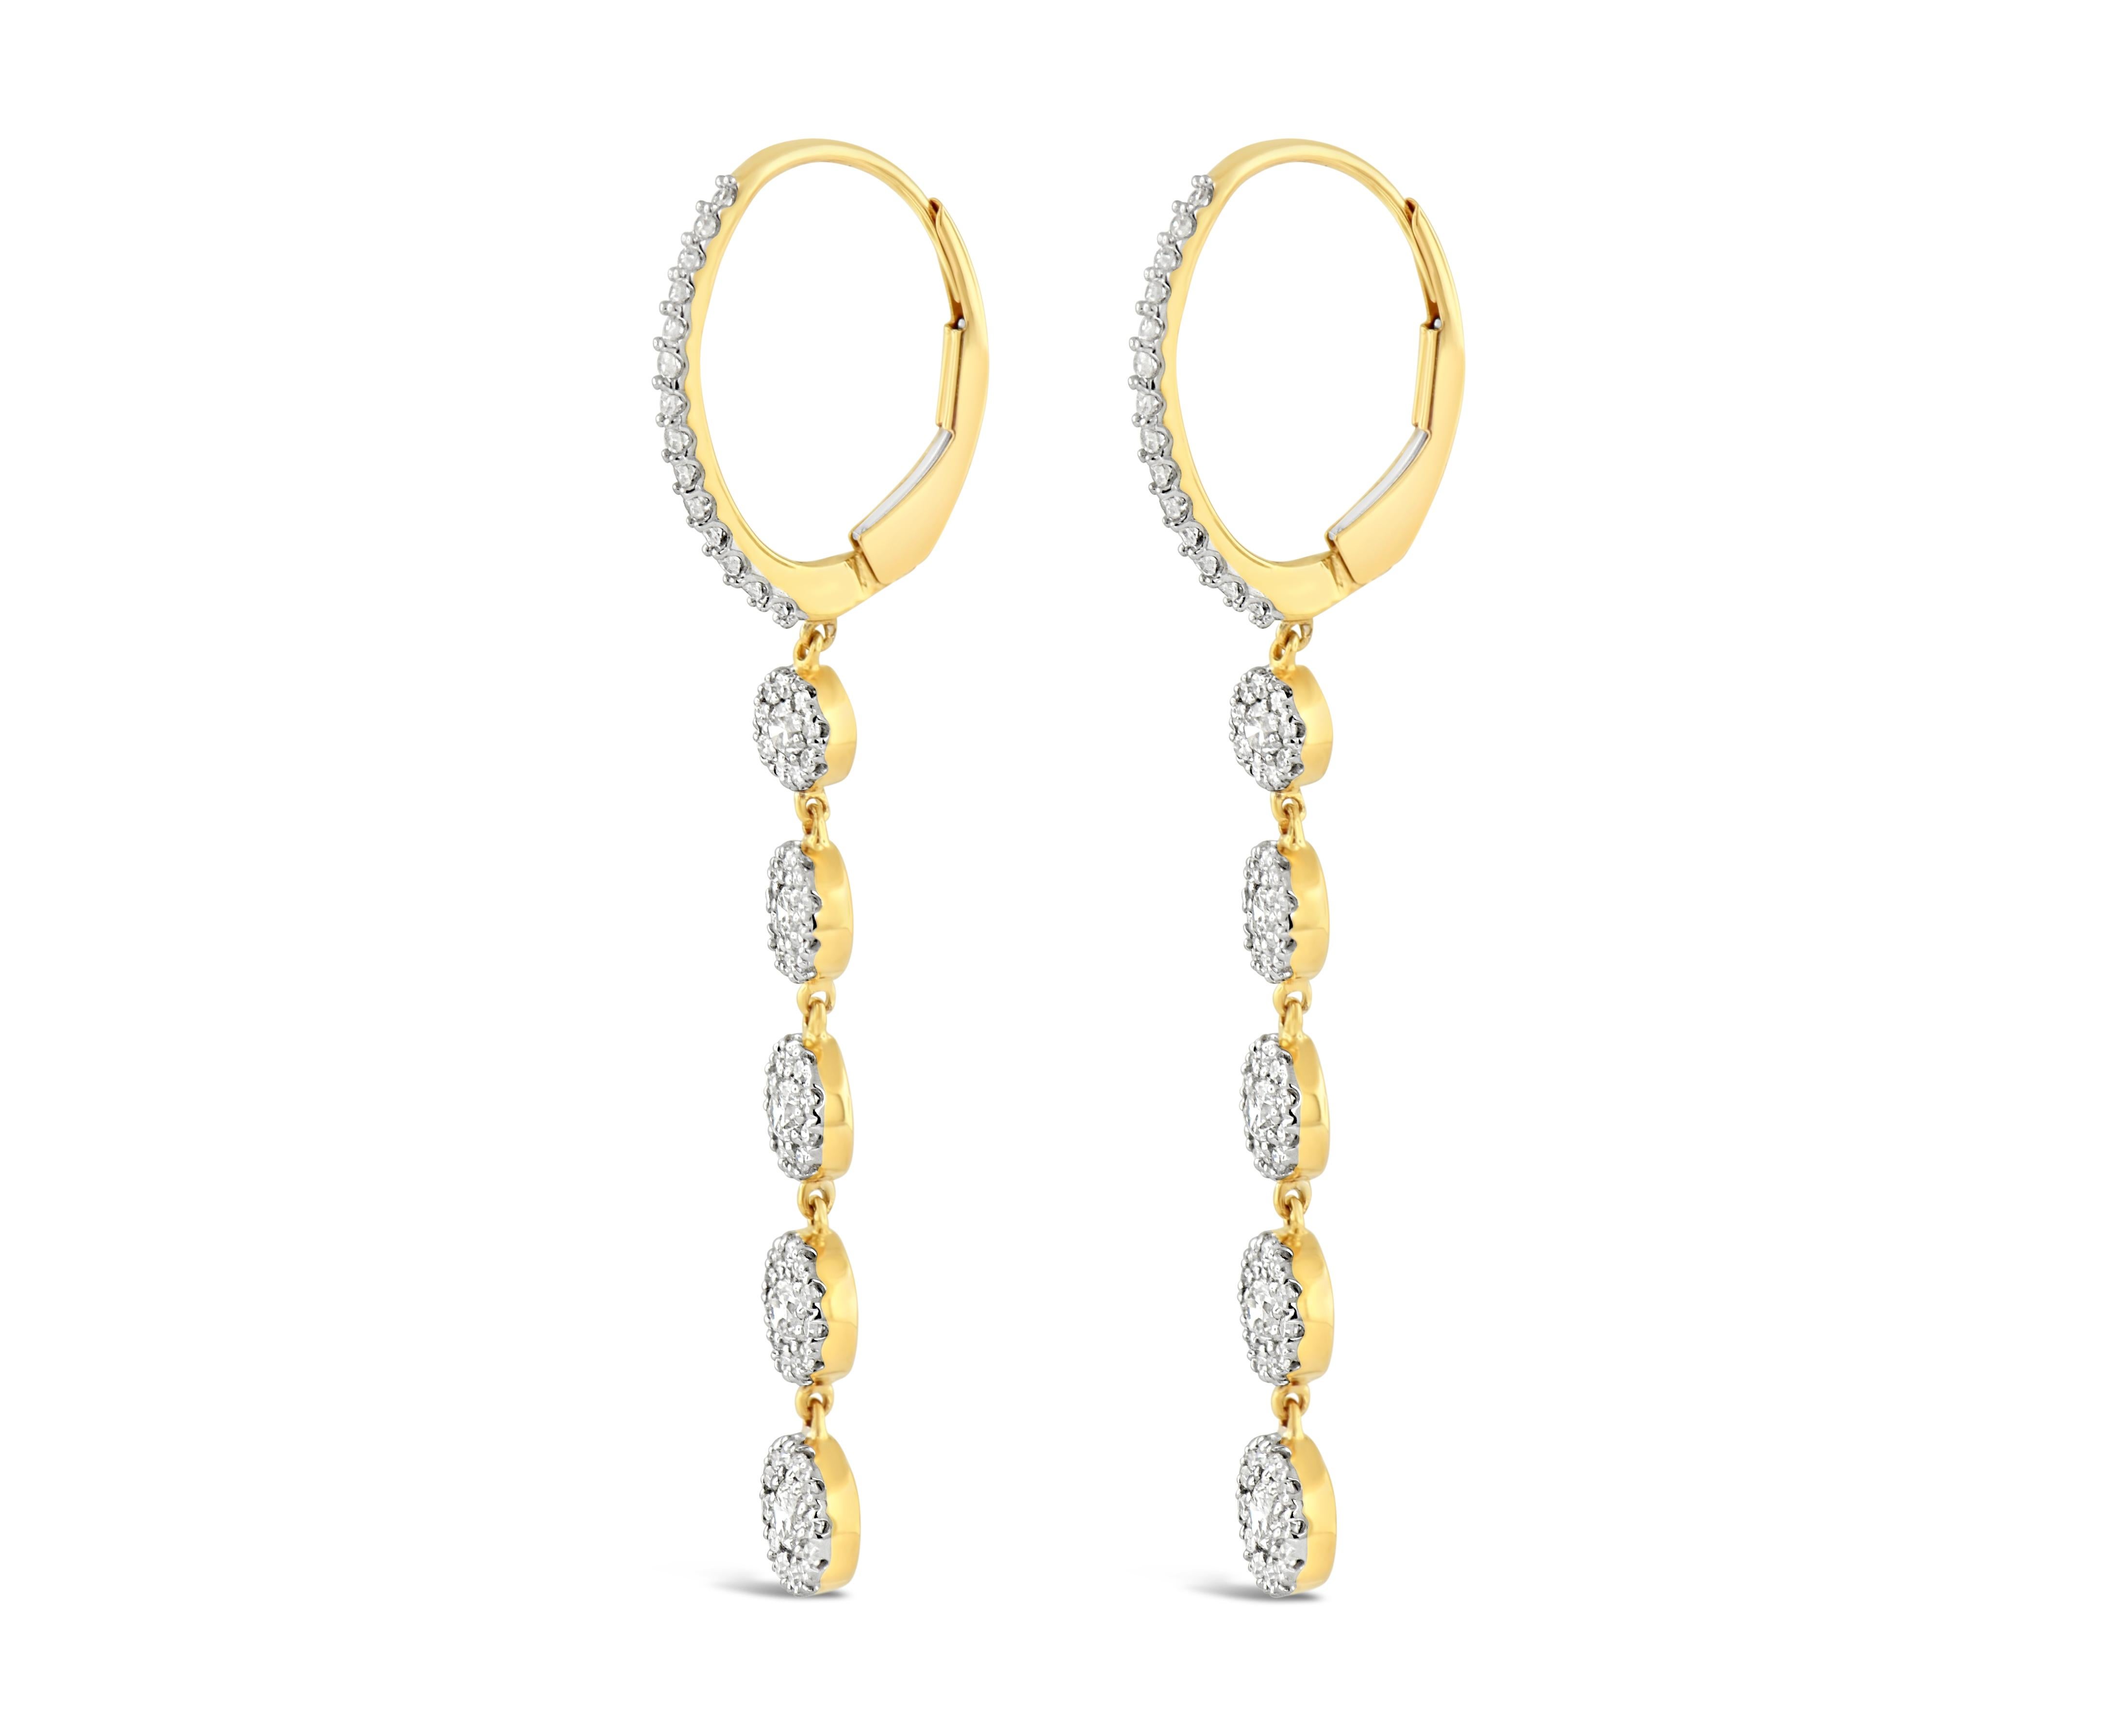 Show off your elegance with these 1 carat diamond dangle earrings. Fine Jewelry you can wear for any occasion.

14K Yellow Gold Diamond Dangle Earrings
Diamond weight: 1.03 ct total weight
Diamond color: H
Diamond clarity: I1